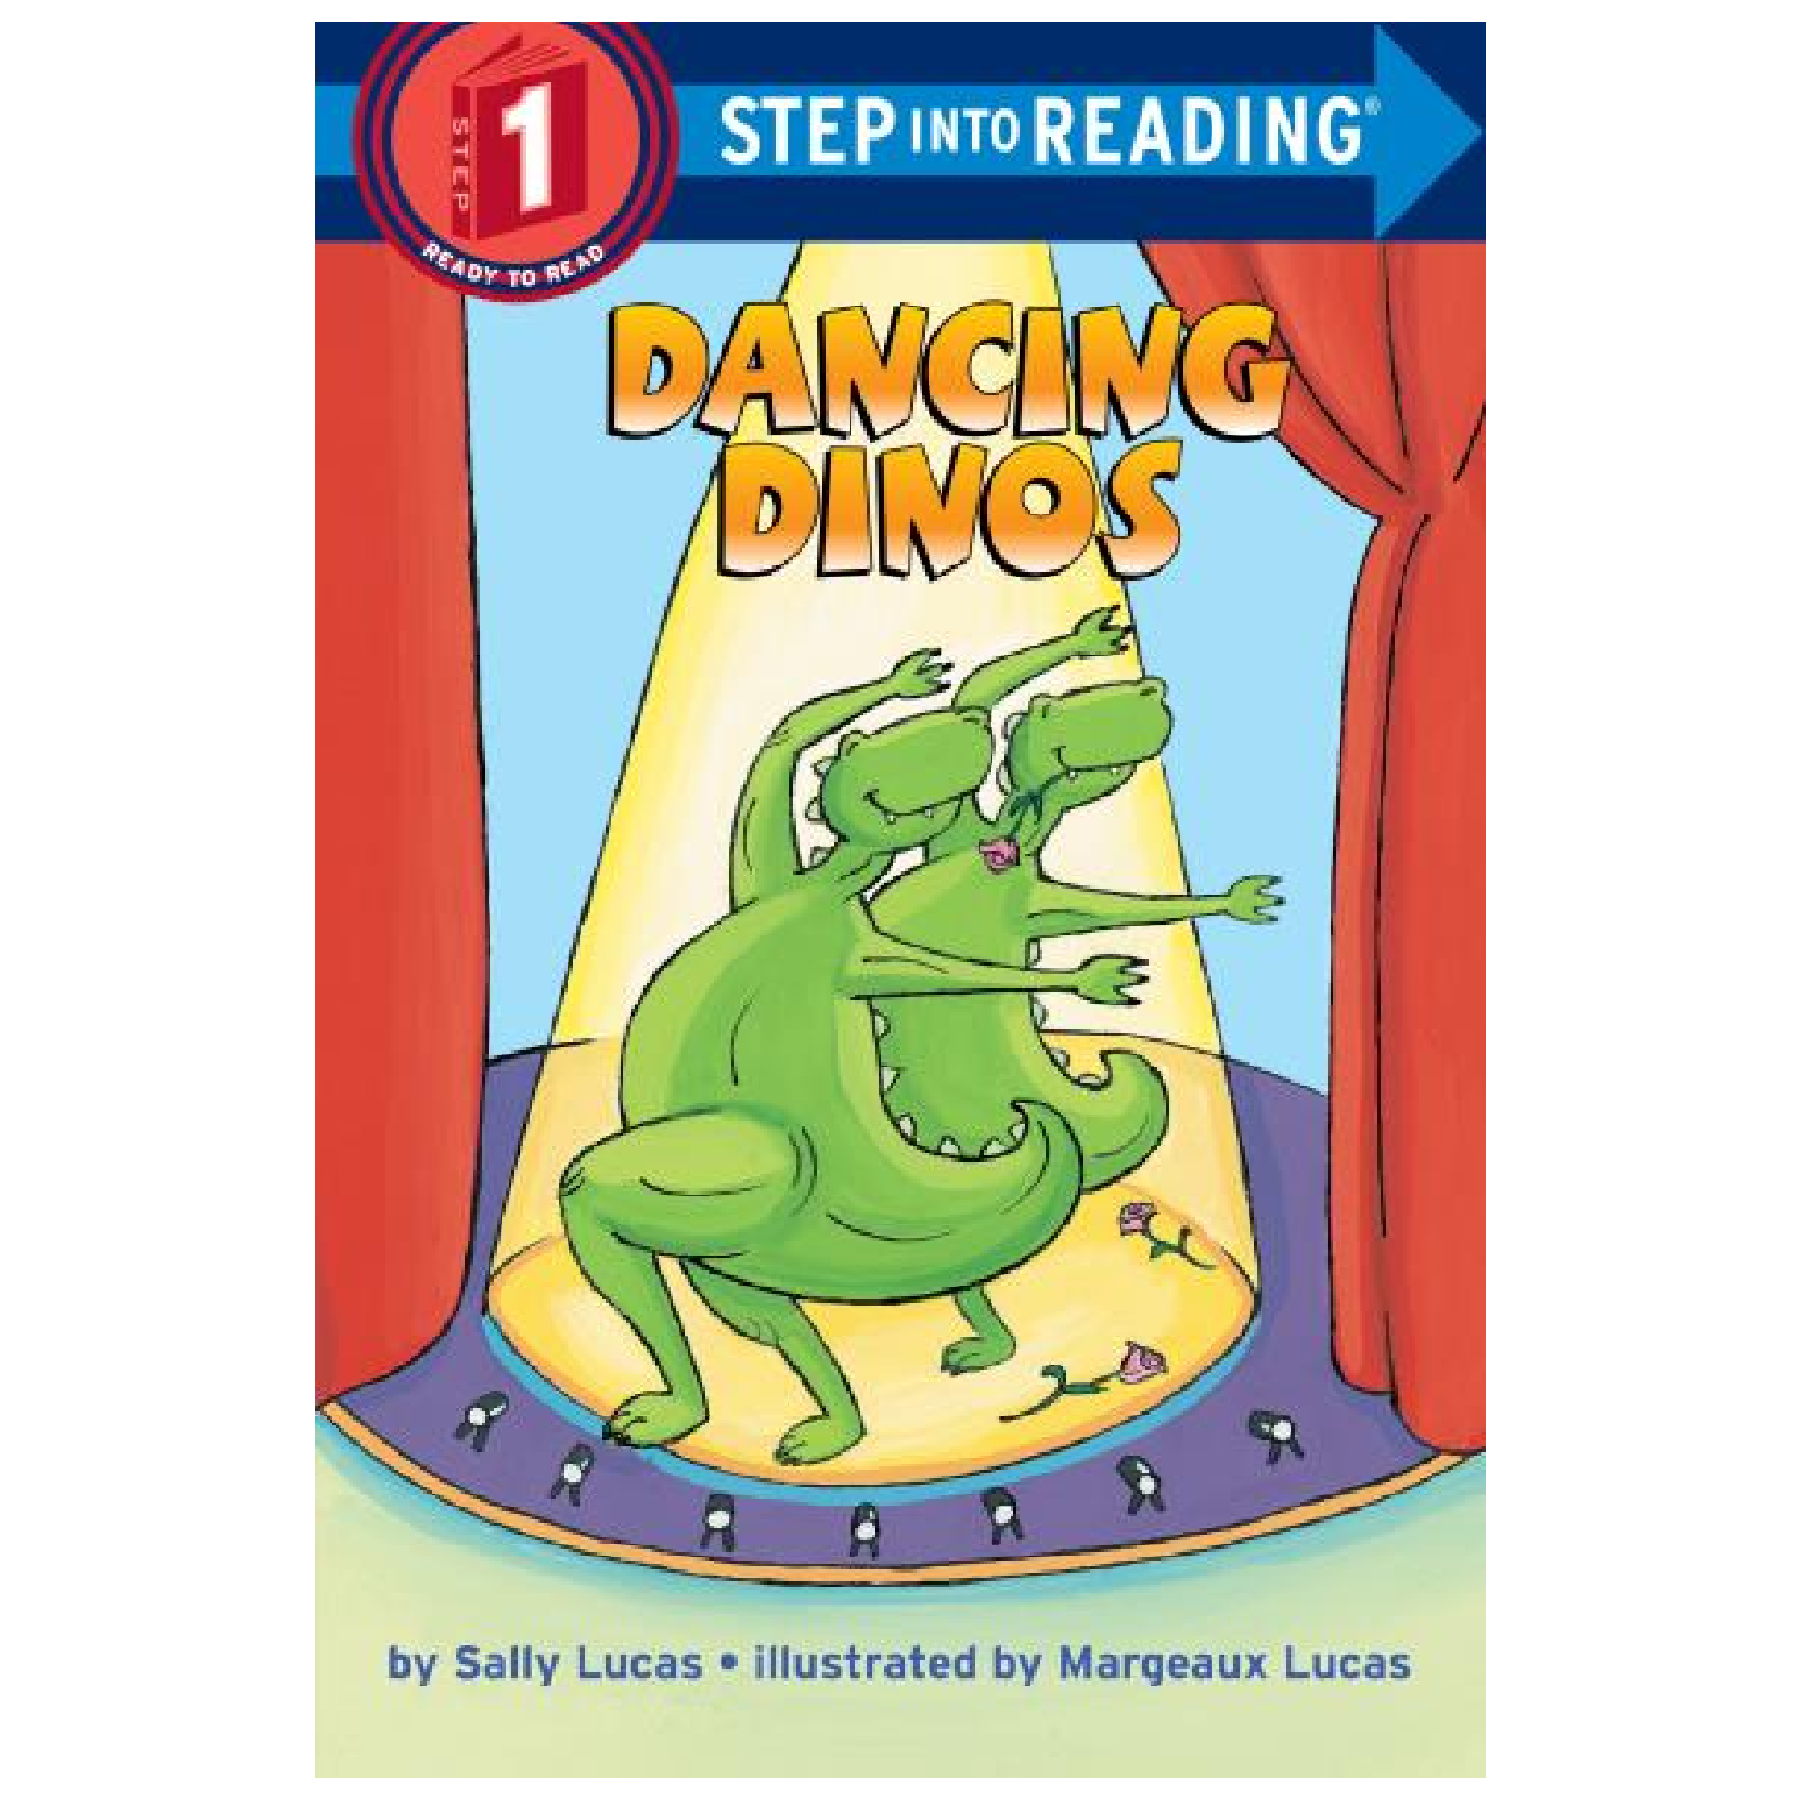 Step into Reading Level #1 - Battleford Boutique